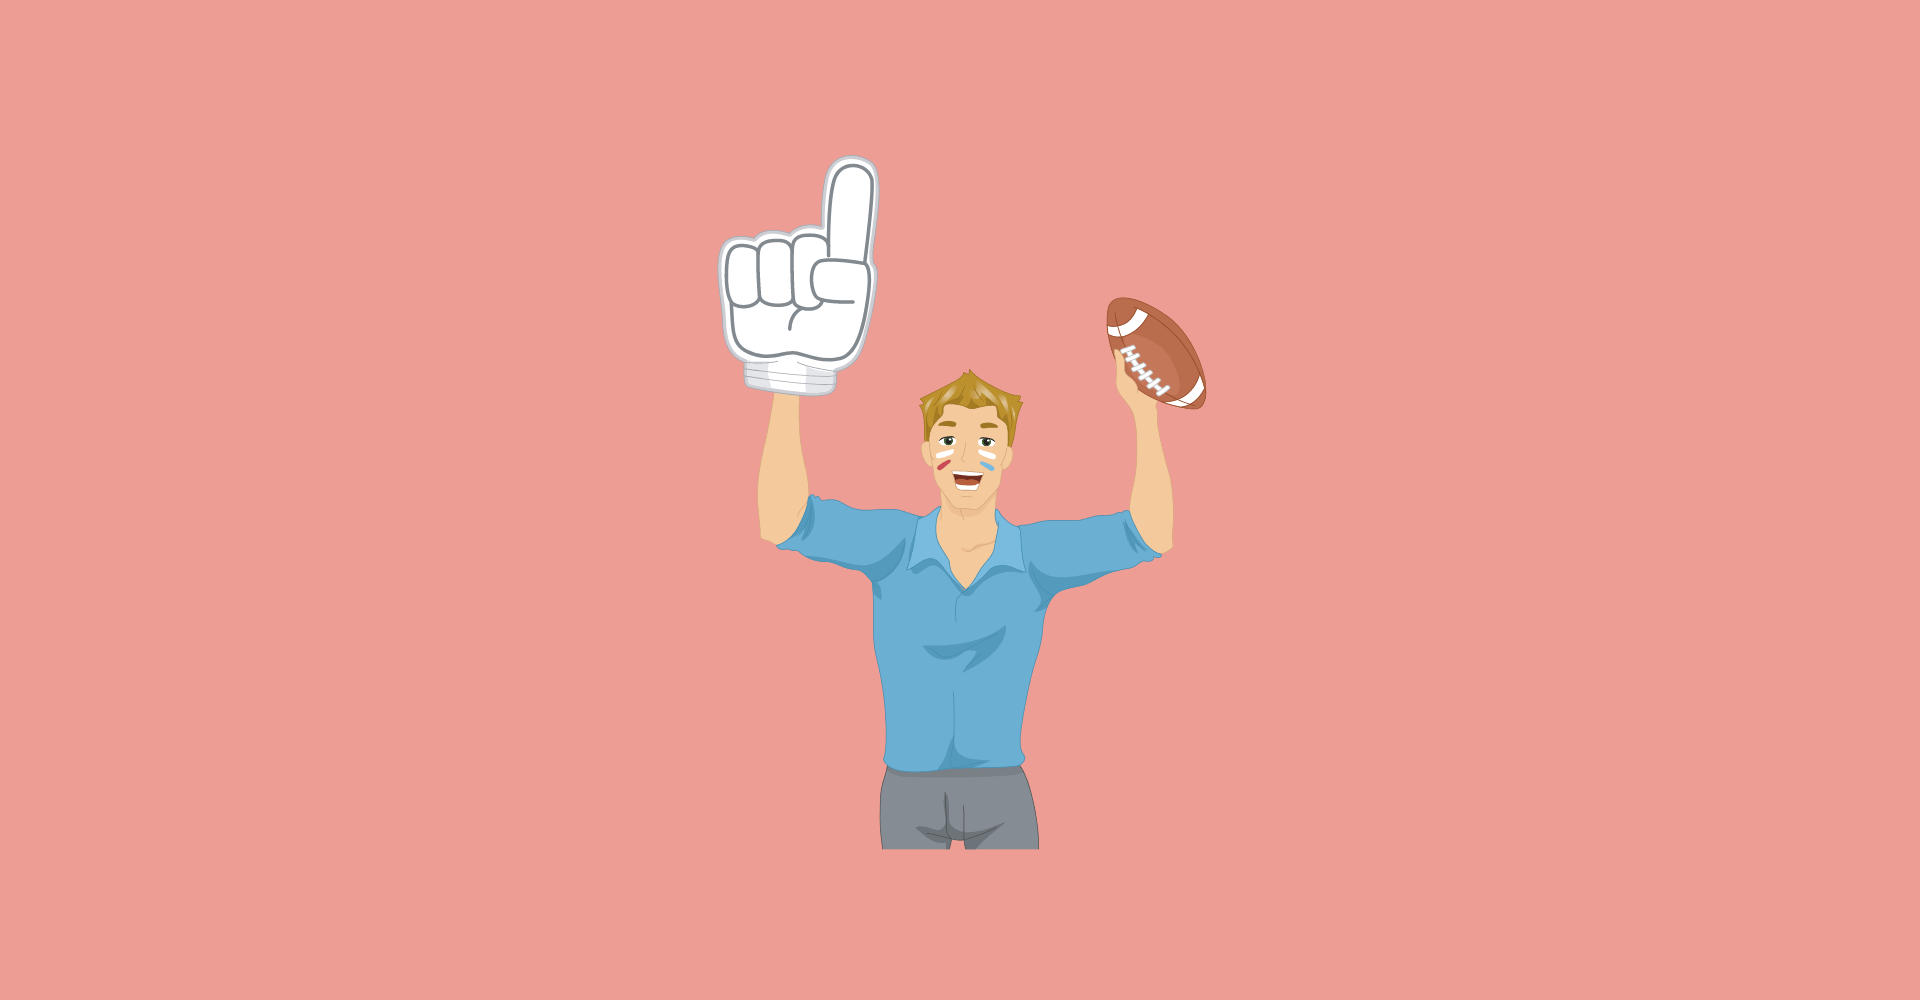 illustrated sports fan holding foam finger and football on red background for sports fan gift article